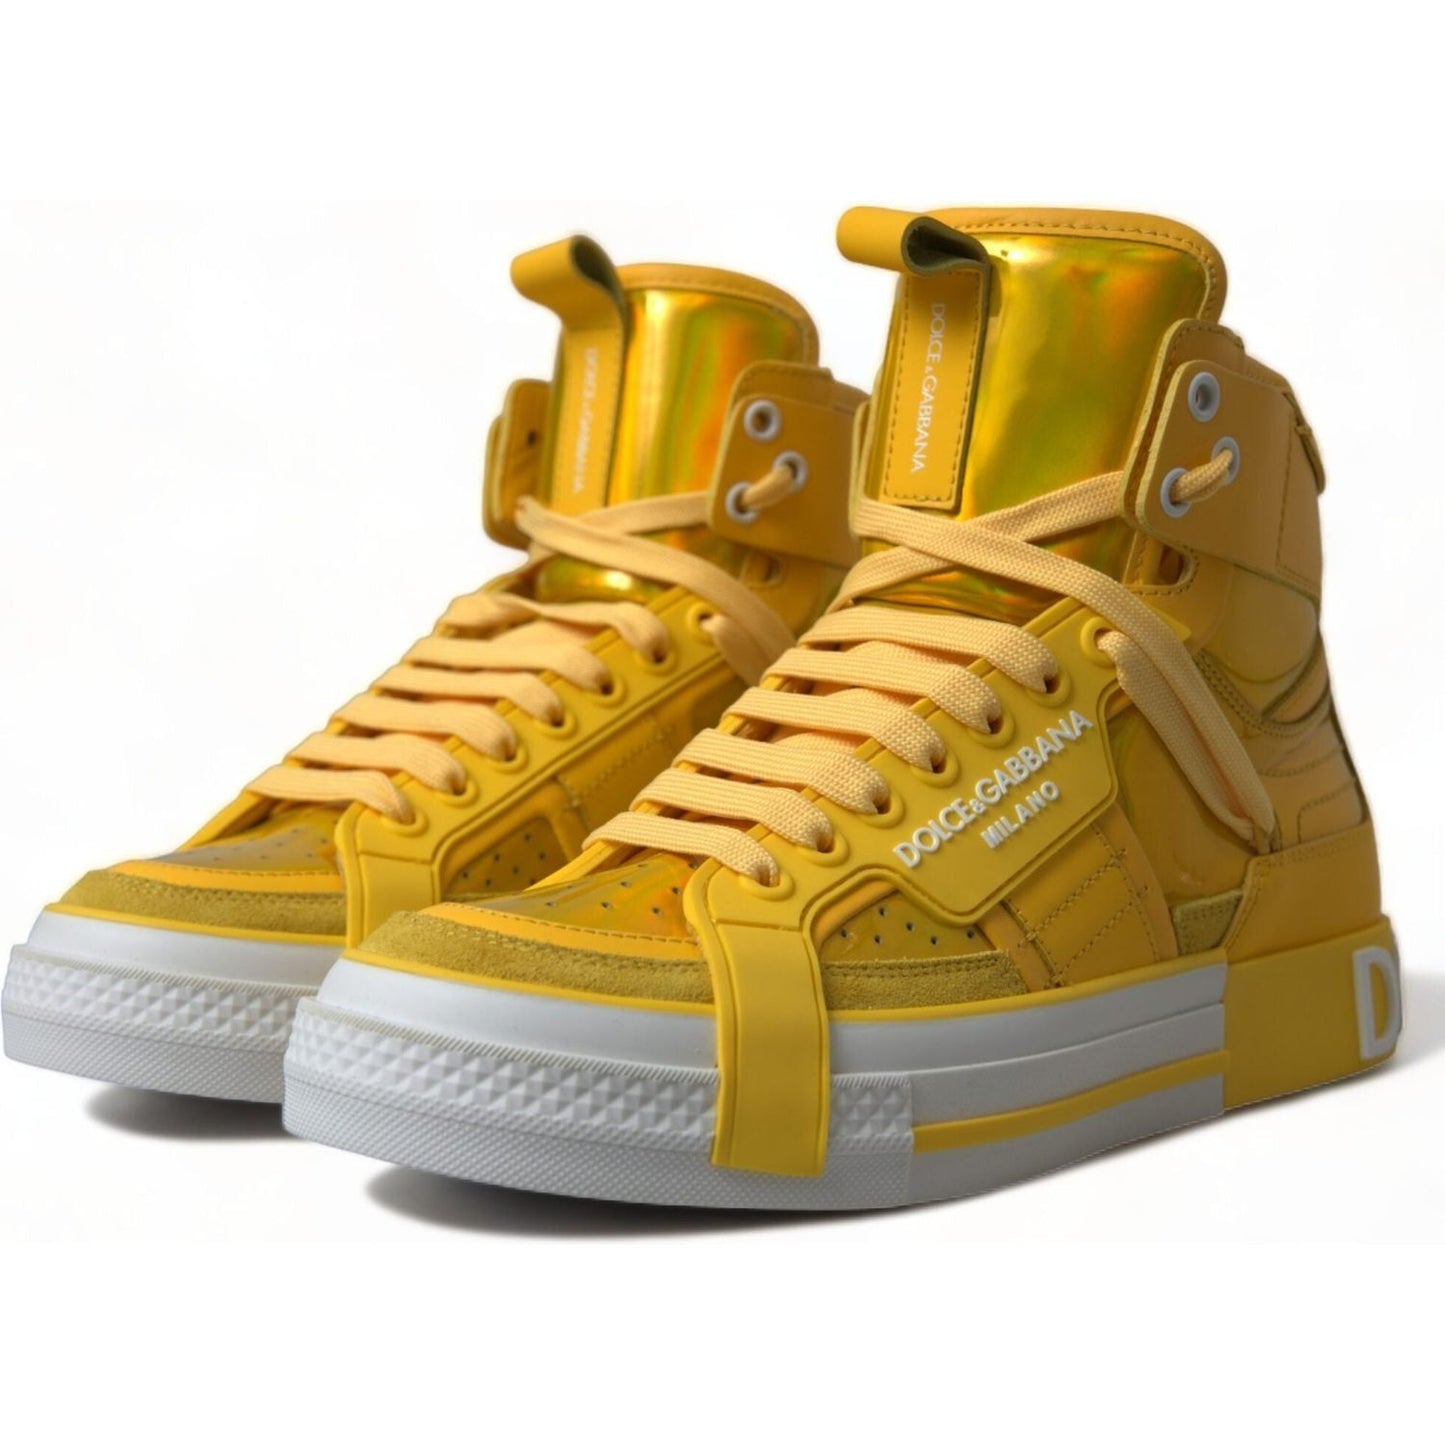 Dolce & Gabbana Chic High-Top Color-Block Sneakers yellow-white-leather-high-top-sneakers-shoes 465A2106-BG-scaled-6ec66747-7bd.jpg